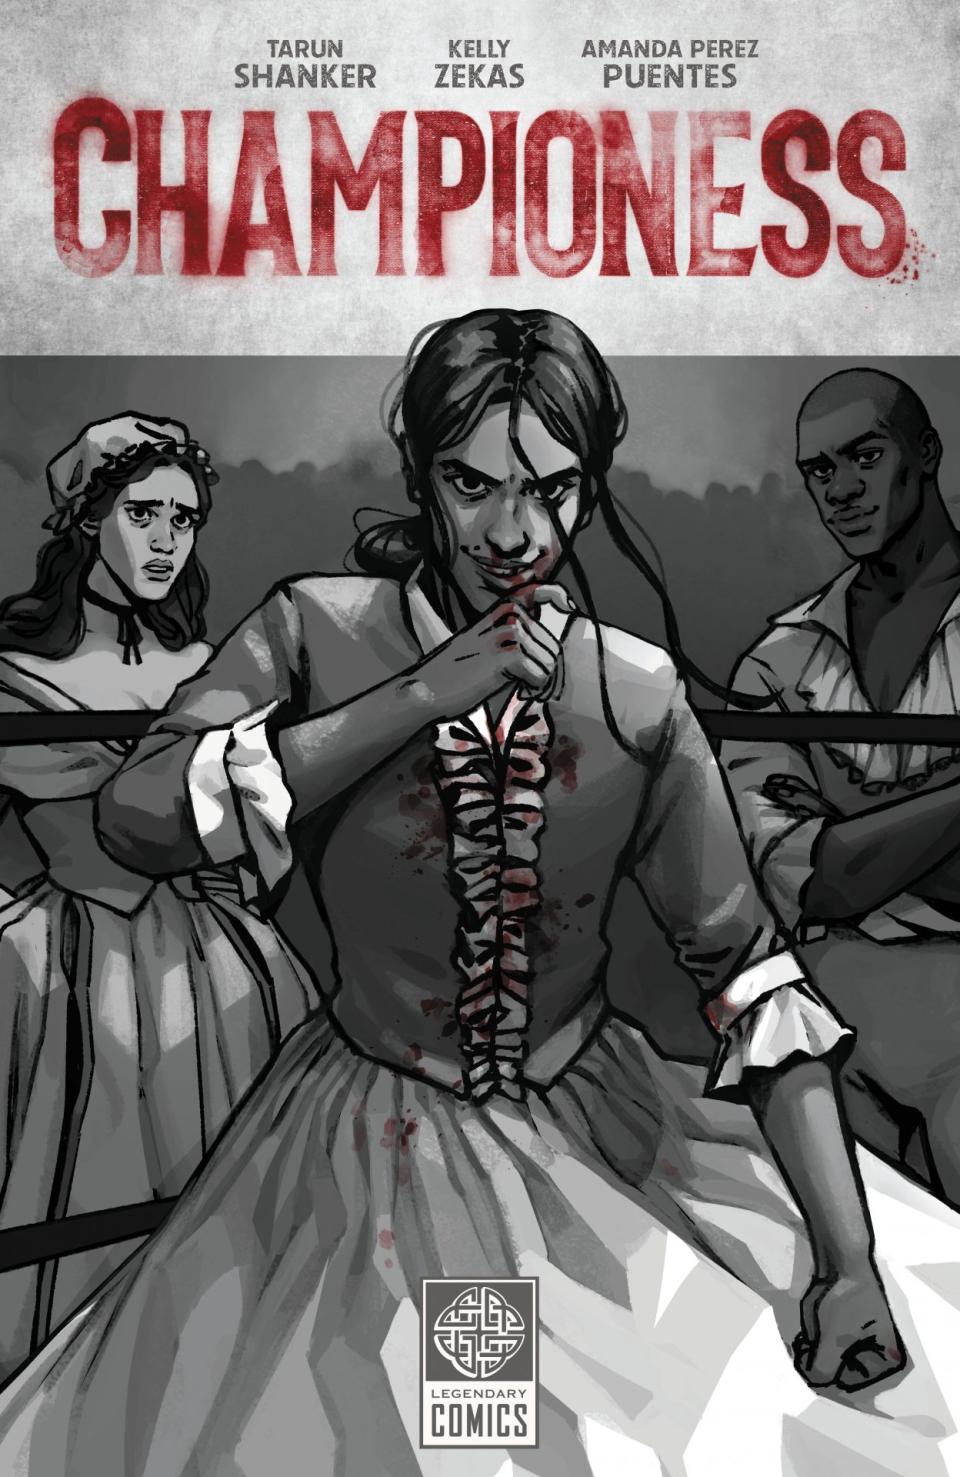 The cover of the Championess graphic novel